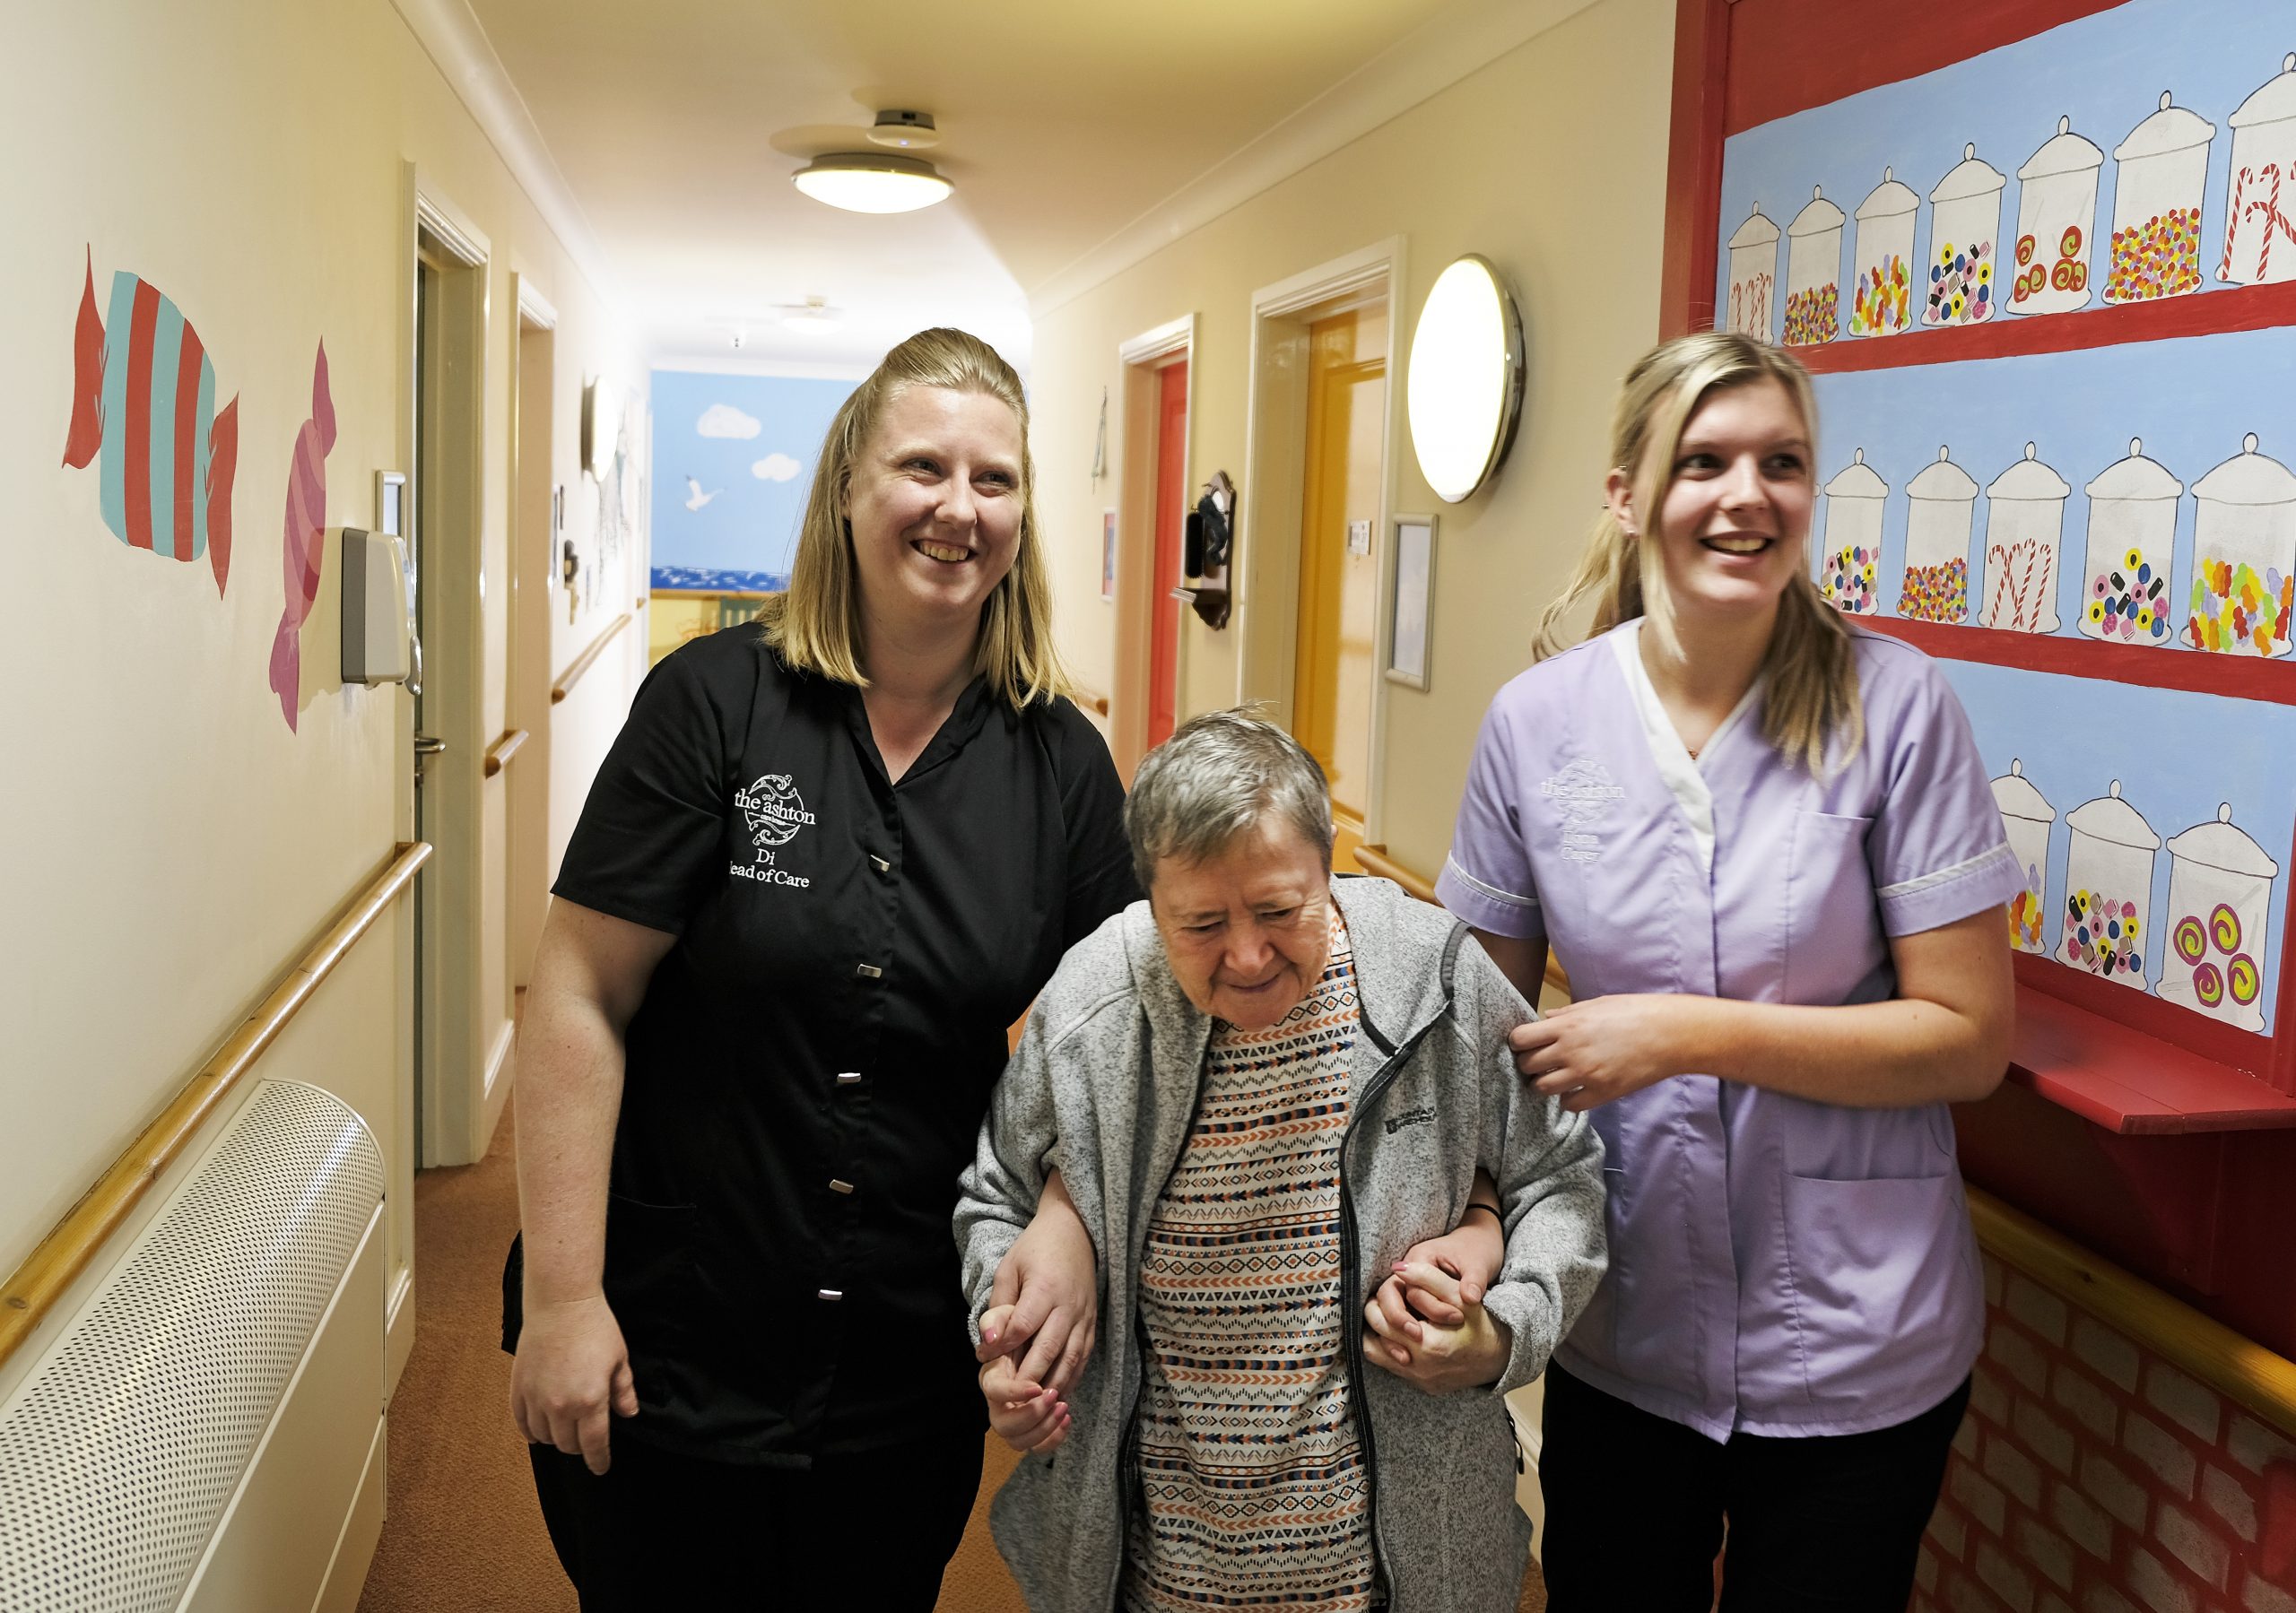 A female residents holding hands with two female care assistants. One wearing black and the other wearing purple.